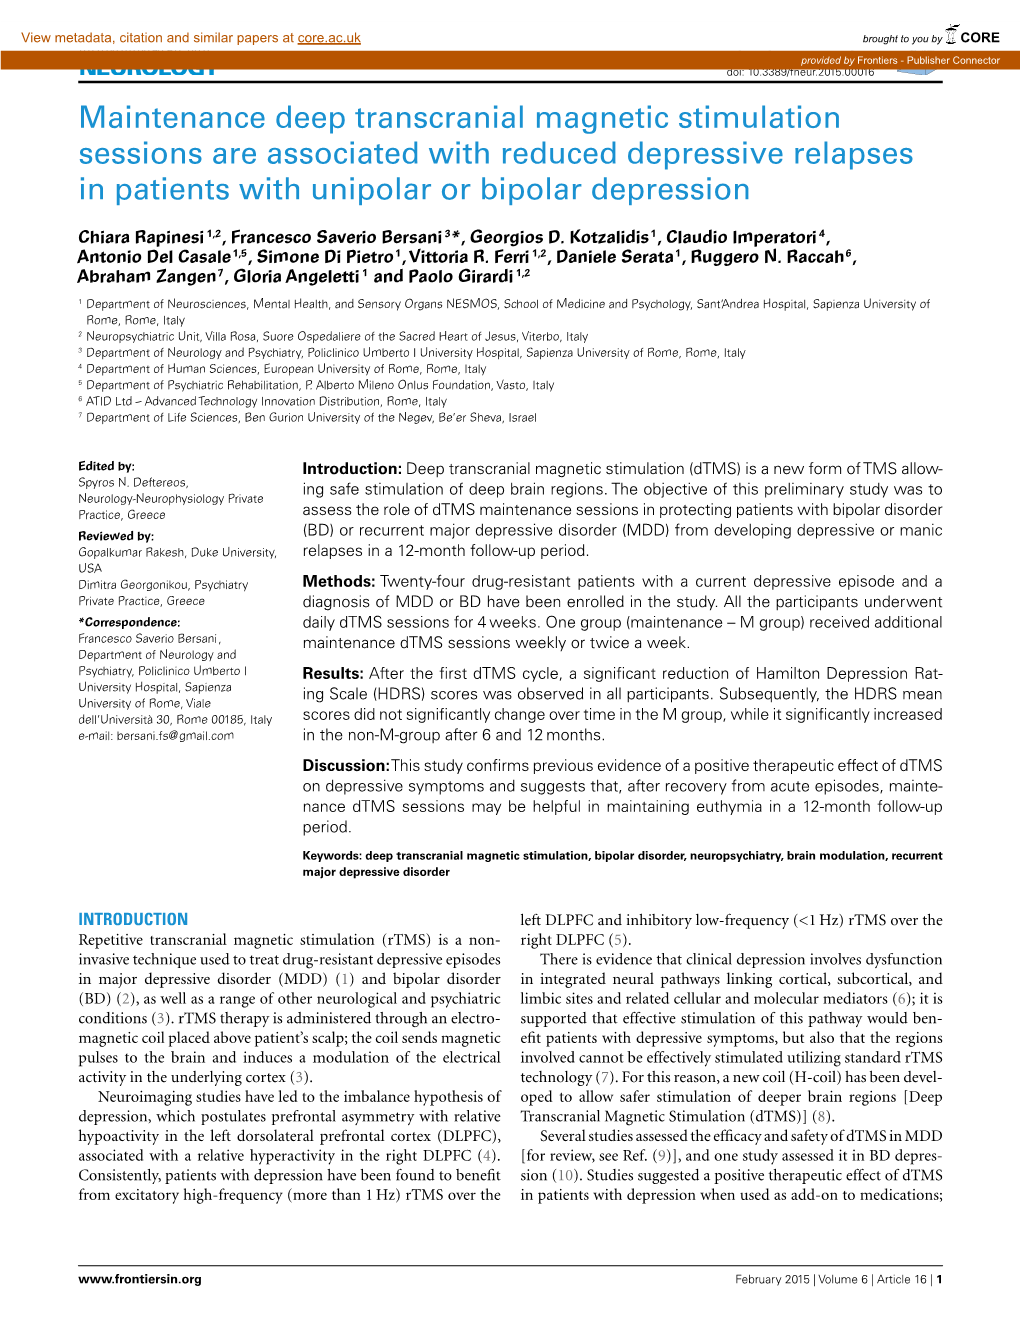 Maintenance Deep Transcranial Magnetic Stimulation Sessions Are Associated with Reduced Depressive Relapses in Patients with Unipolar Or Bipolar Depression